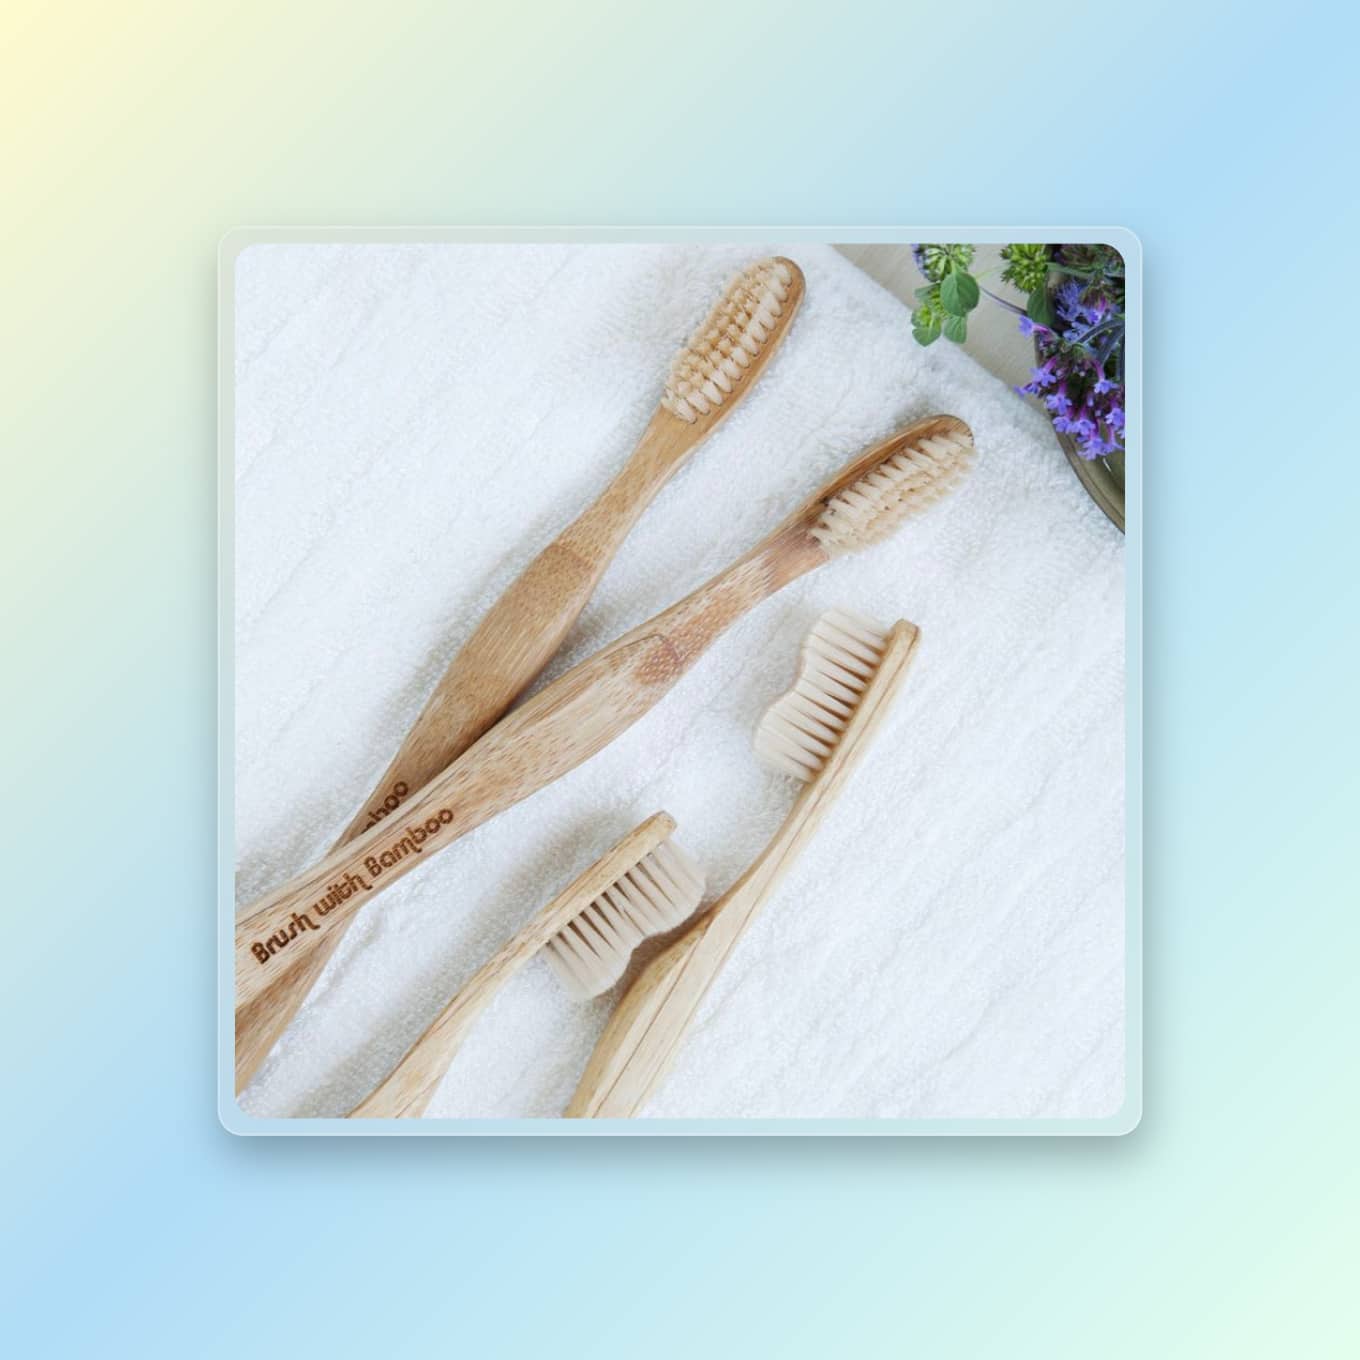 Bamboo toothbrushes that say Brush with Bamboo